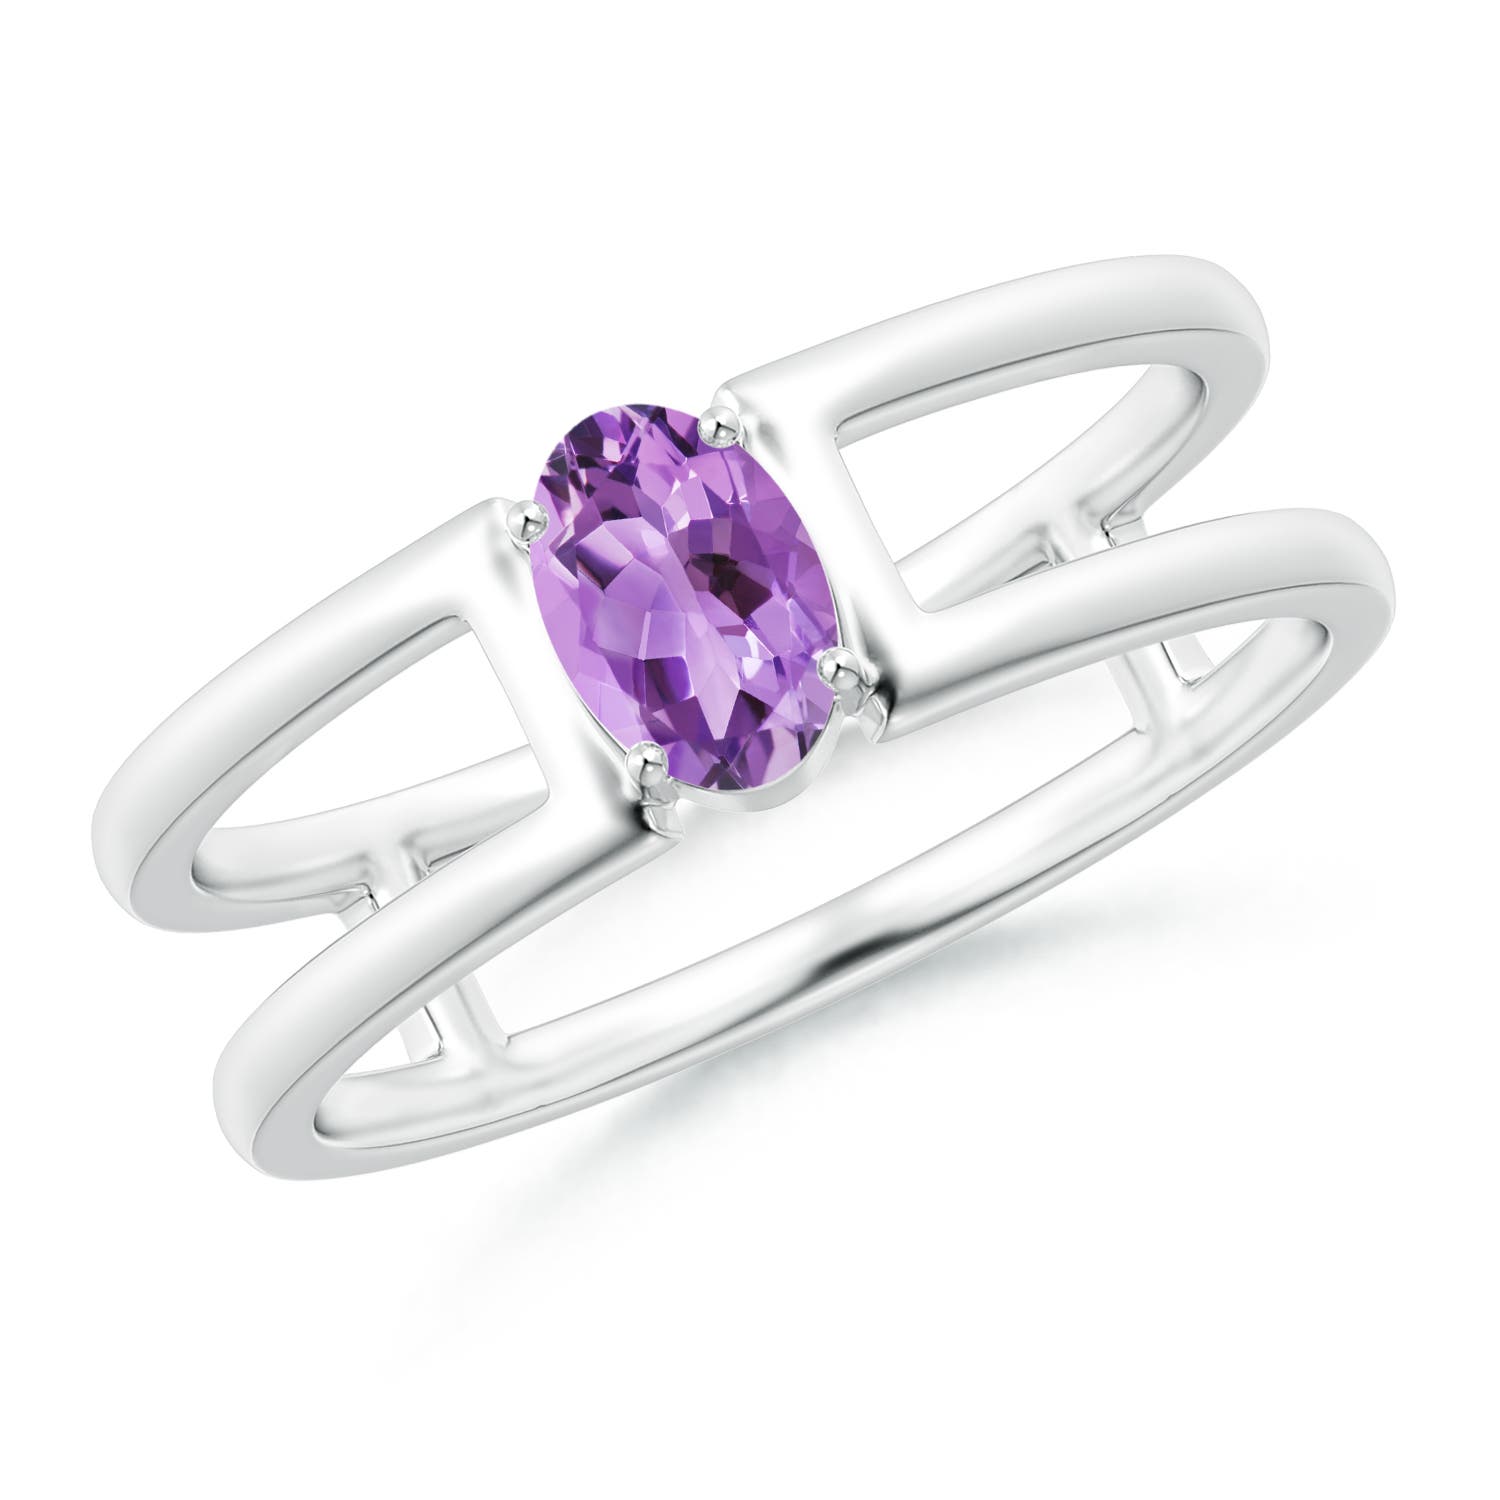 A - Amethyst / 0.4 CT / 14 KT White Gold